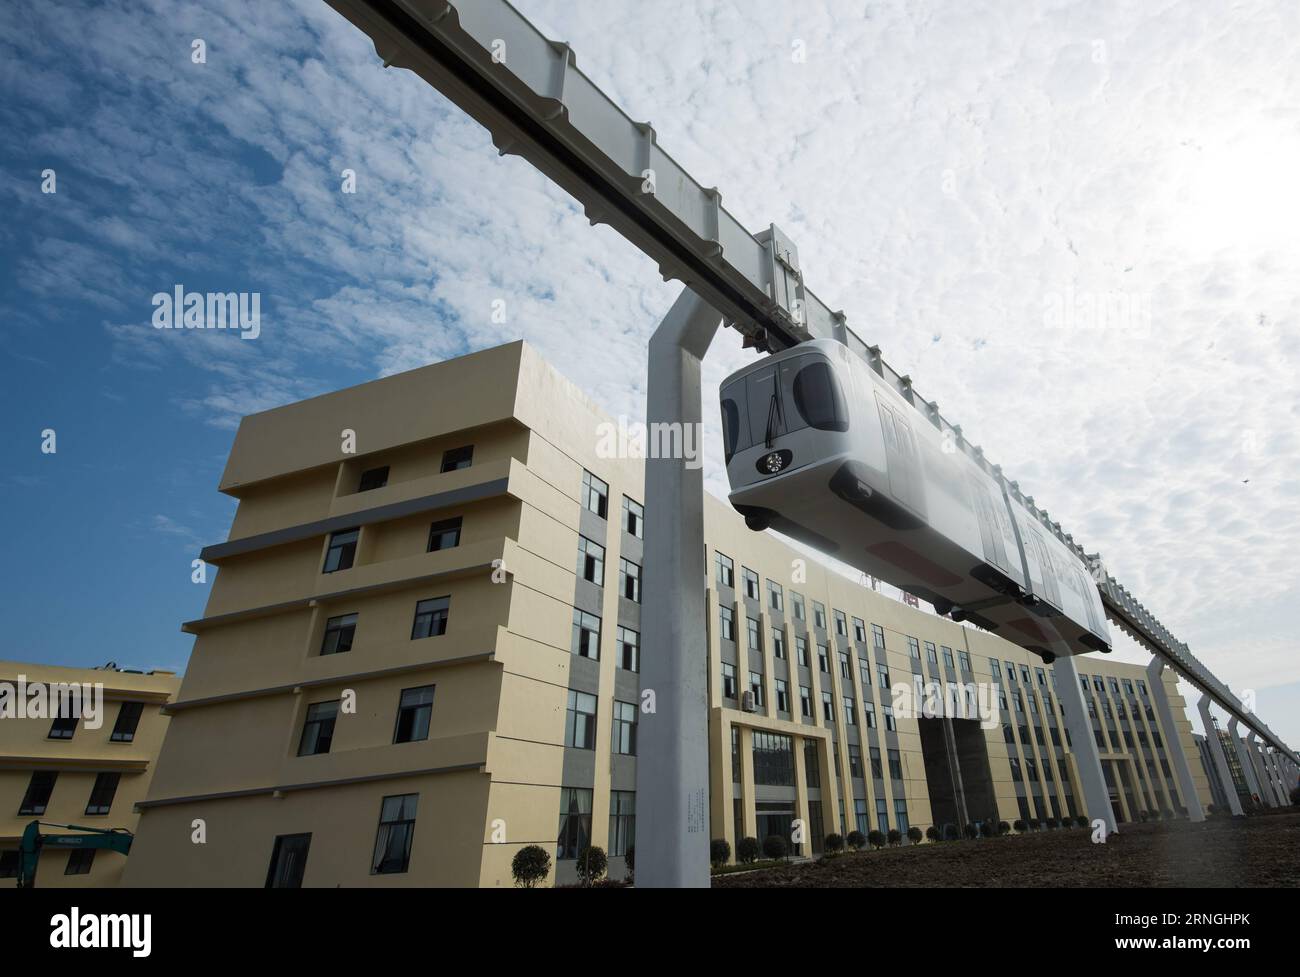 Bilder des Tages Schwebebahn in Chengdu, China (160930) -- CHENGDU, Sept. 30, 2016 -- Photo taken on Sept. 30, 2016 shows a lithium-battery powered train suspended from a railway line in Chengdu, southwest China s Sichuan Province. China s first suspension railway line finished its test run Friday. The train, which has a speed of 60 km per hour, successfully ran along the 300-meter test section of the railway line after being suspended from the line.) (mp) CHINA-CHENGDU-SUSPENSION RAILWAY-TEST RUN (CN) JiangxHongjing PUBLICATIONxNOTxINxCHN   Images the Day Levitation train in Chengdu China  Ch Stock Photo